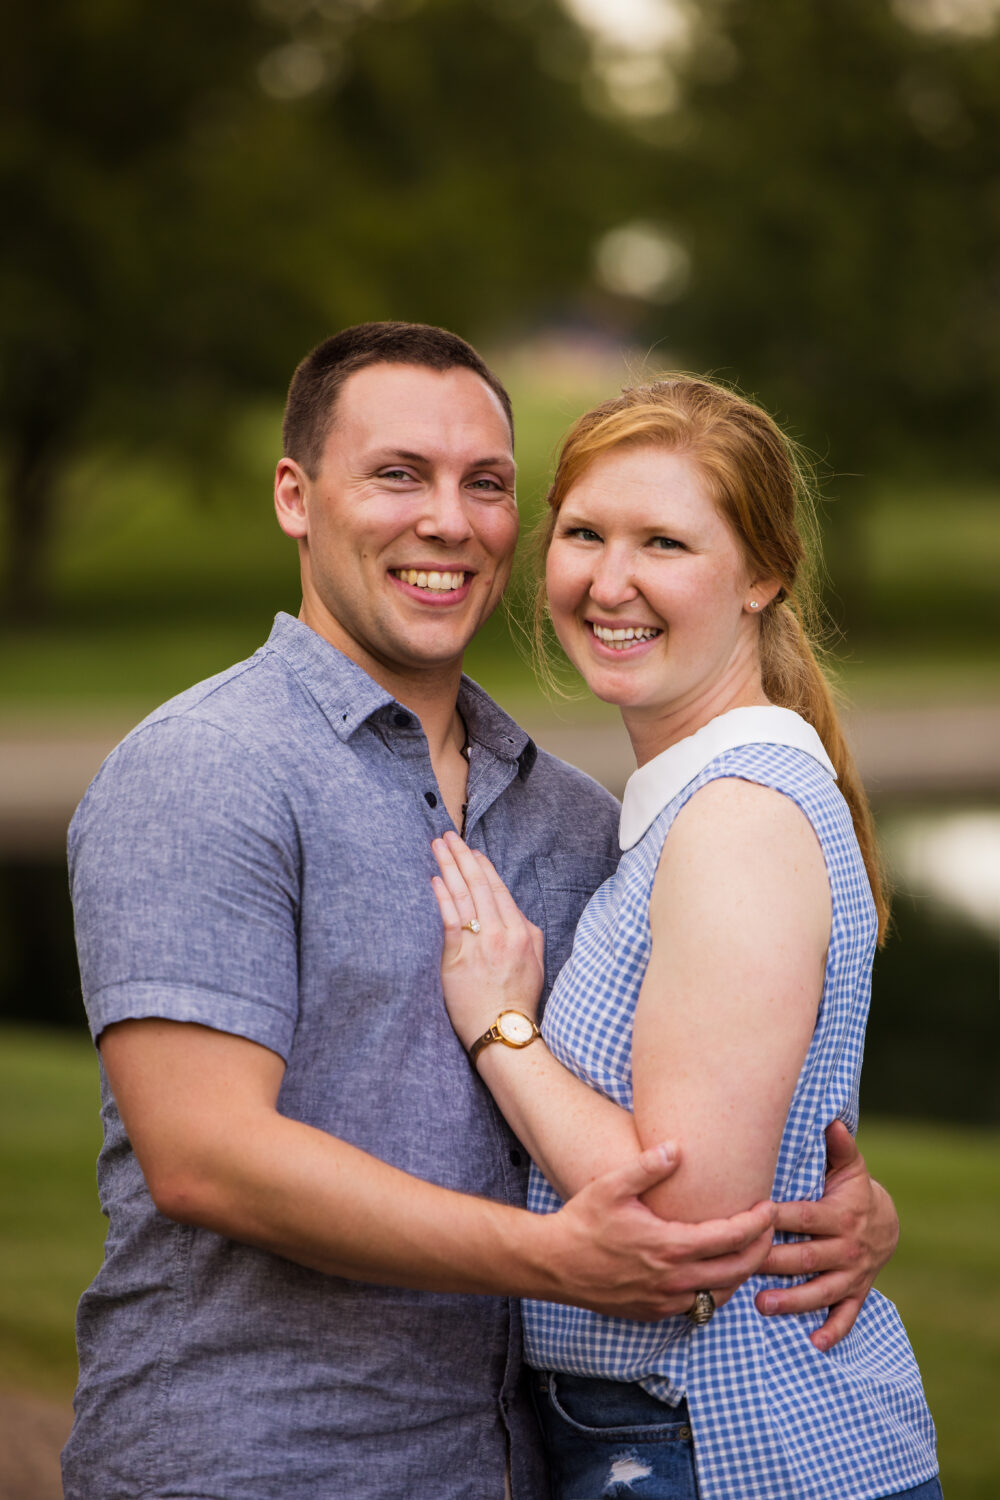 traditional image of the couple embracing one another and showing off the new ring and smiling from ear to ear captured by surprise proposal photographer, lisa rhinehart at the Missouri botanical gardens 